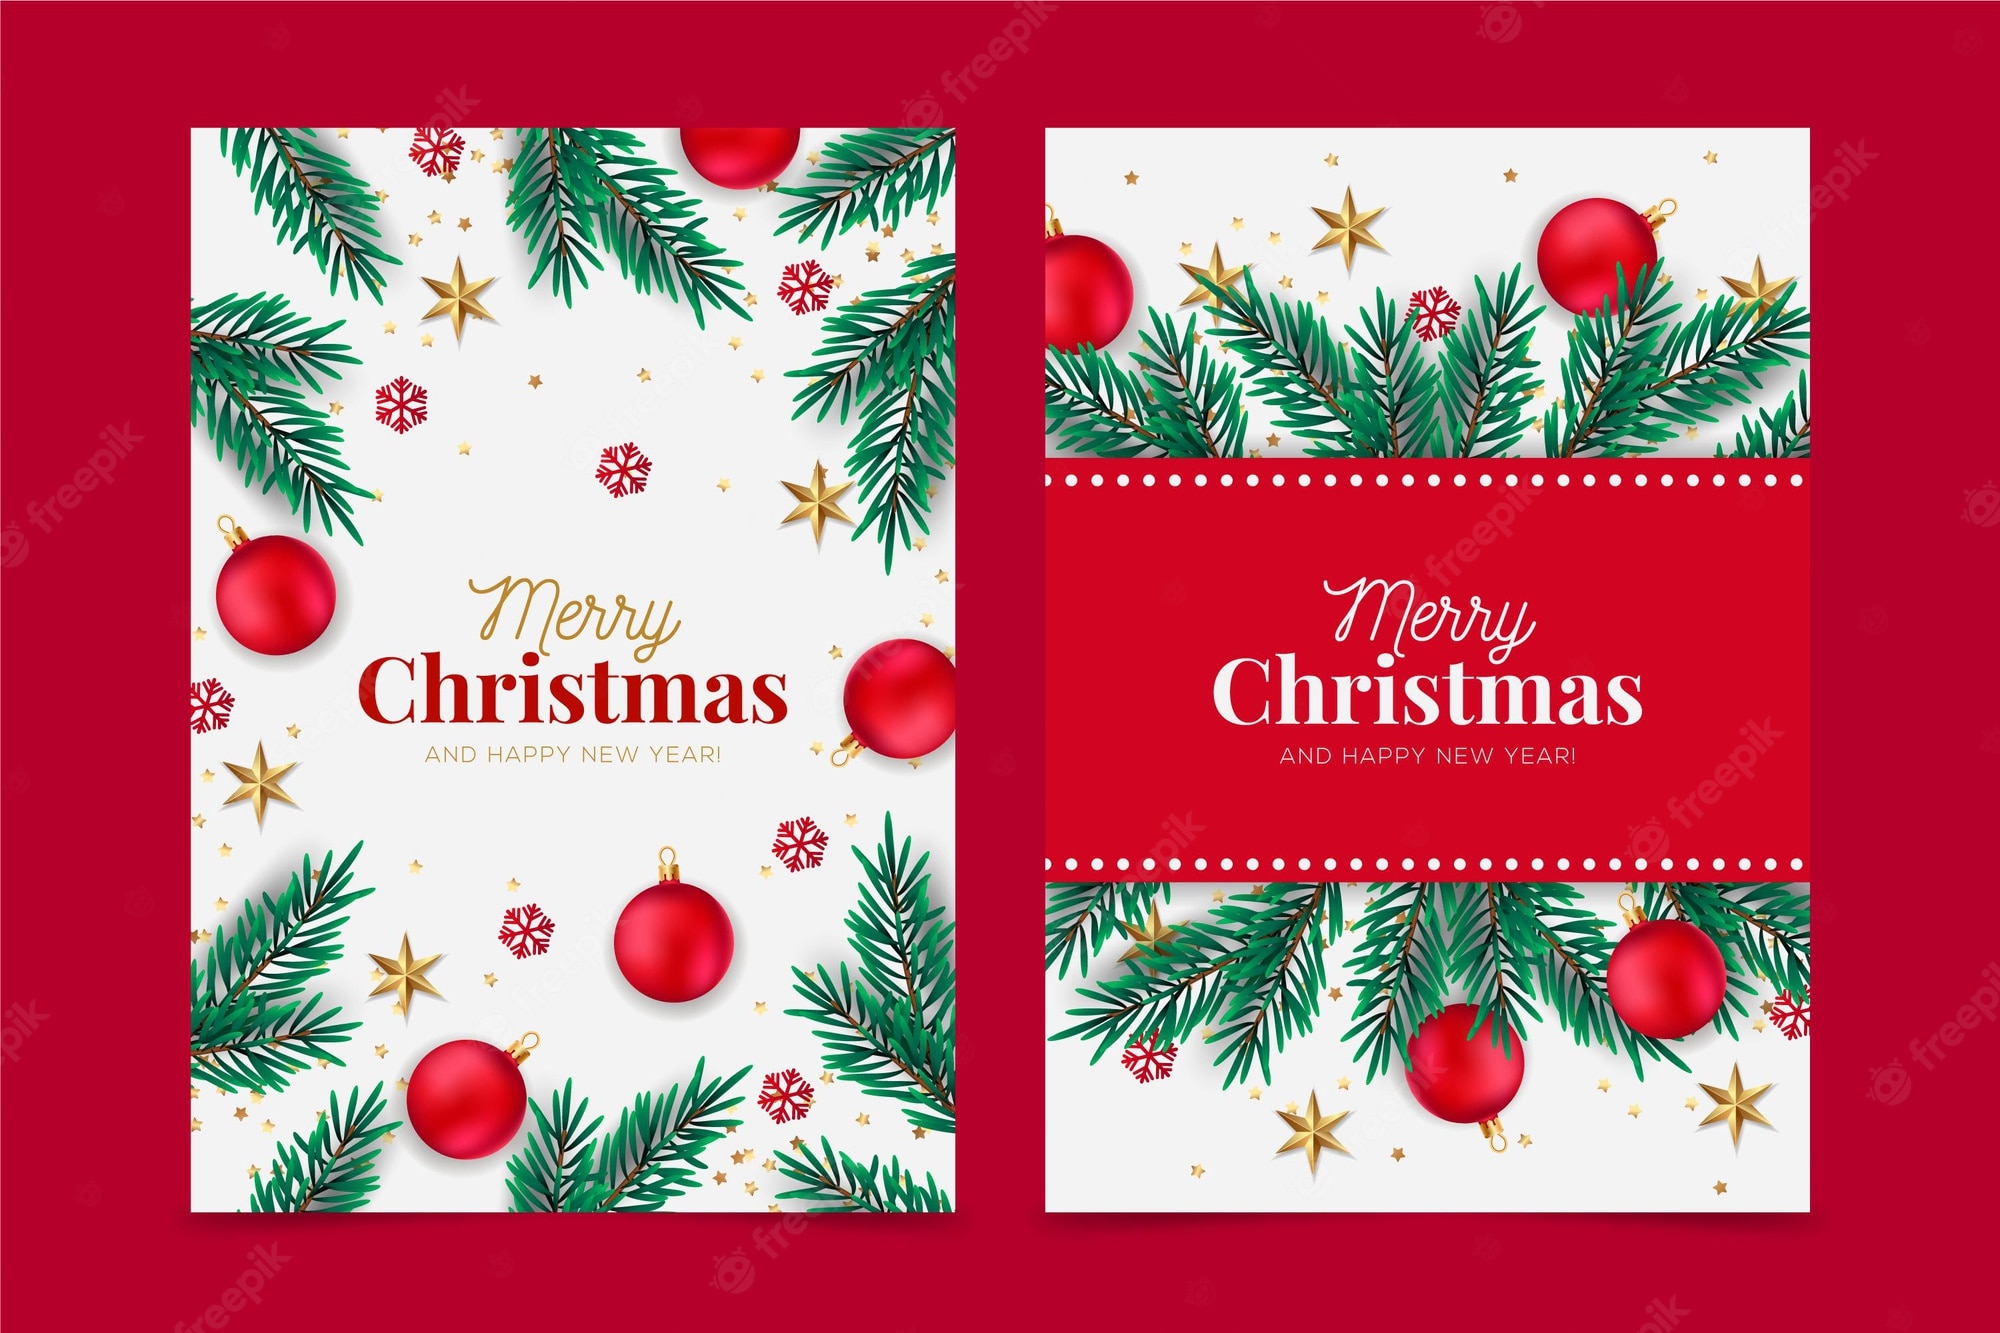 Free Christmas Card Template For Email